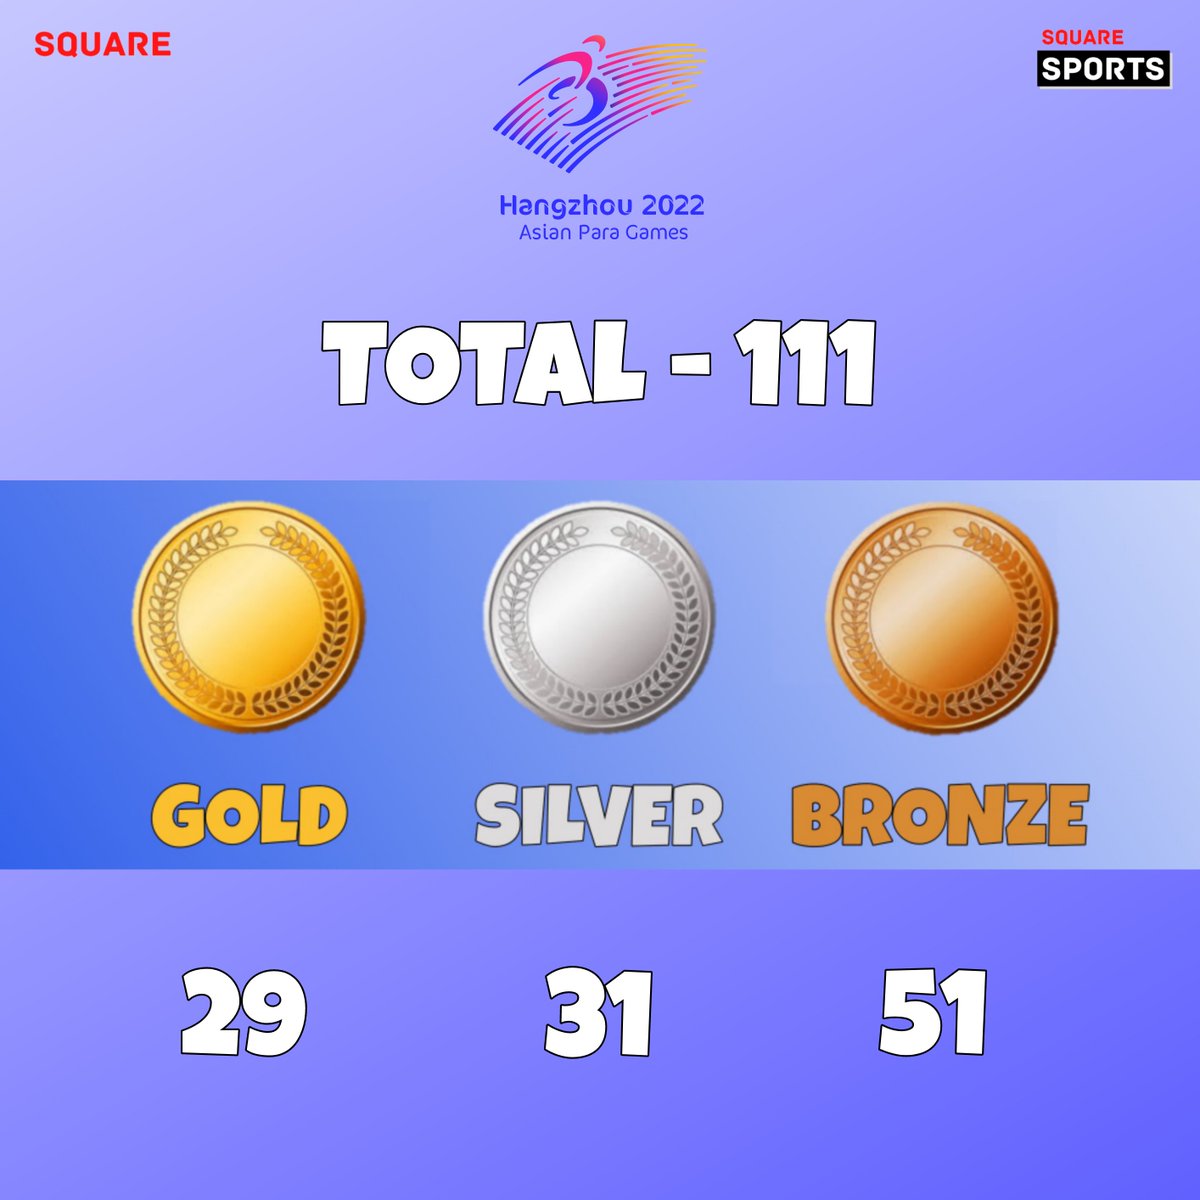 It is another historic HUNDRED indeed !!!

Team India finished with a total of 111 medals in the 4th Asian Para Games Hangzhou 2022. Team clinched 🥇29, 🥈31, 🥉51 in the Games. India stood at 5th Position in overall medals tally

#AsianParaGames2022 #TeamIndia #IssBaar100Paar